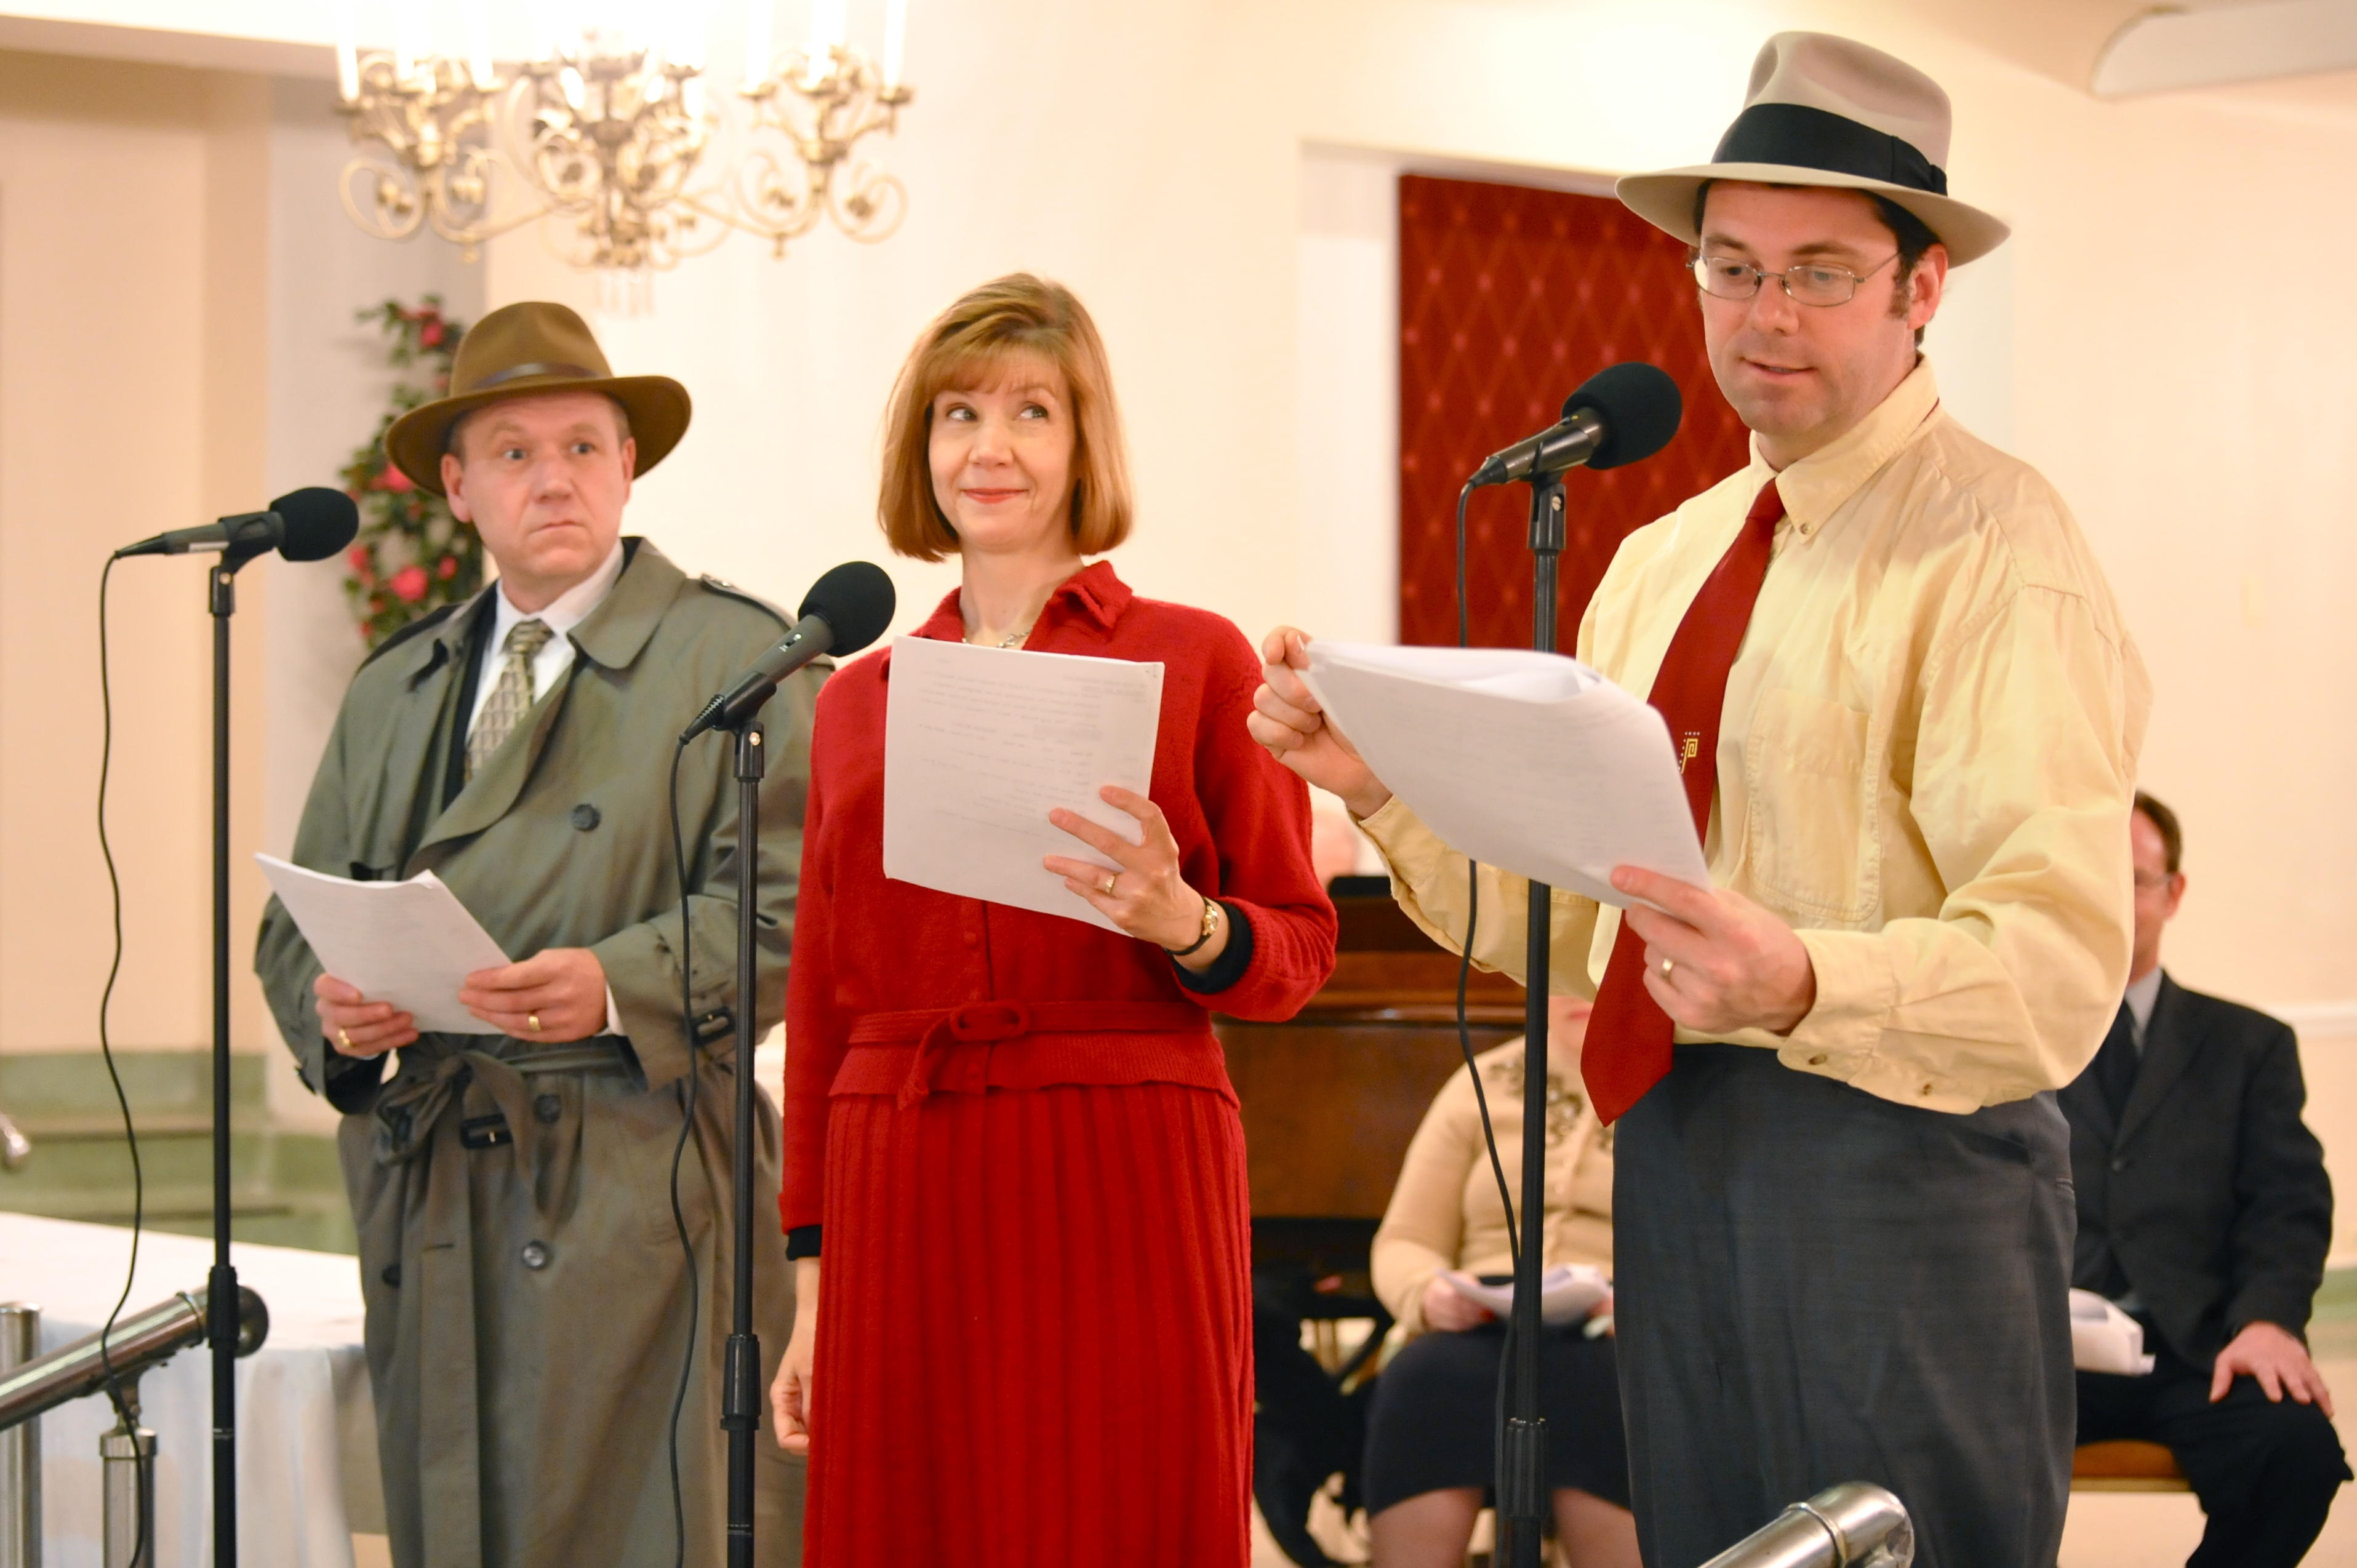 Those Thrilling Days of Yesteryear perform "The New York Strip" at the Oak Park Arms retirement community. 